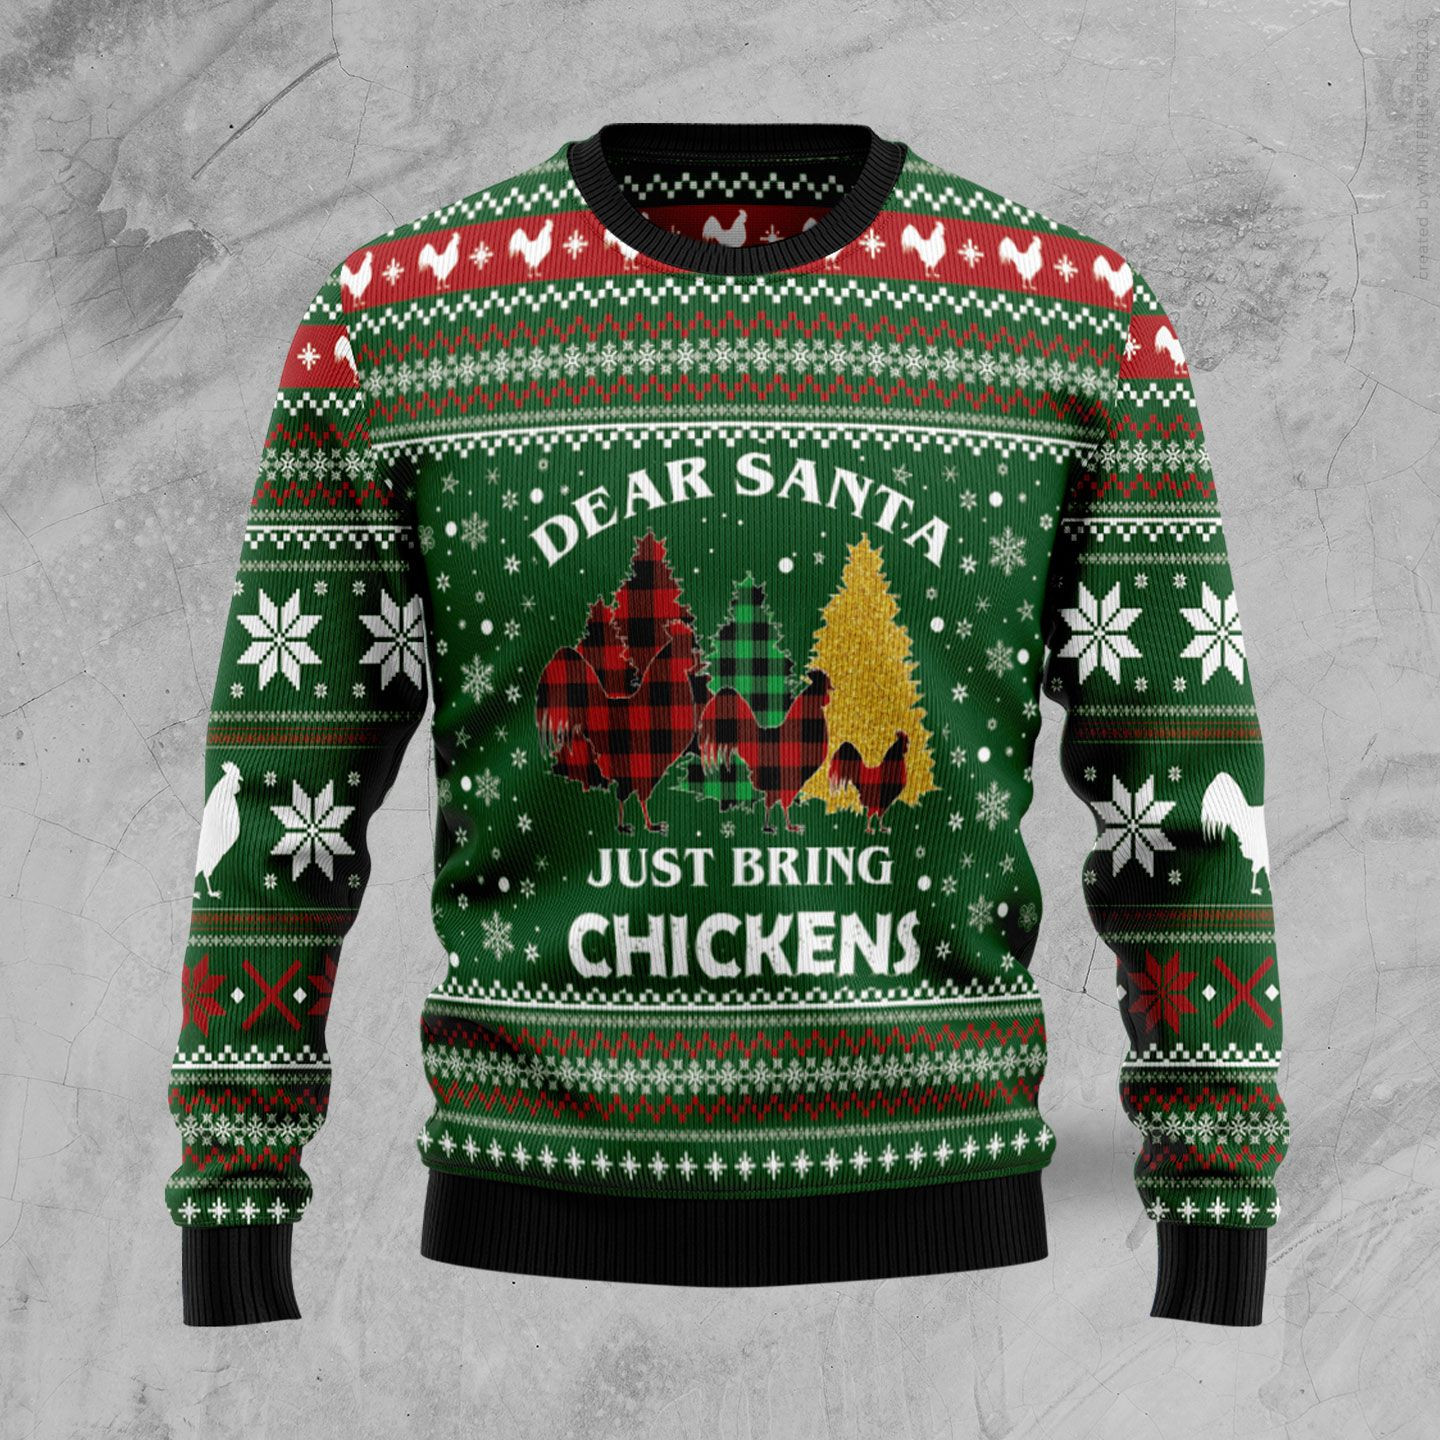 Dear Santa Just Bring Chickens Ugly Christmas Sweater Ugly Sweater For Men Women